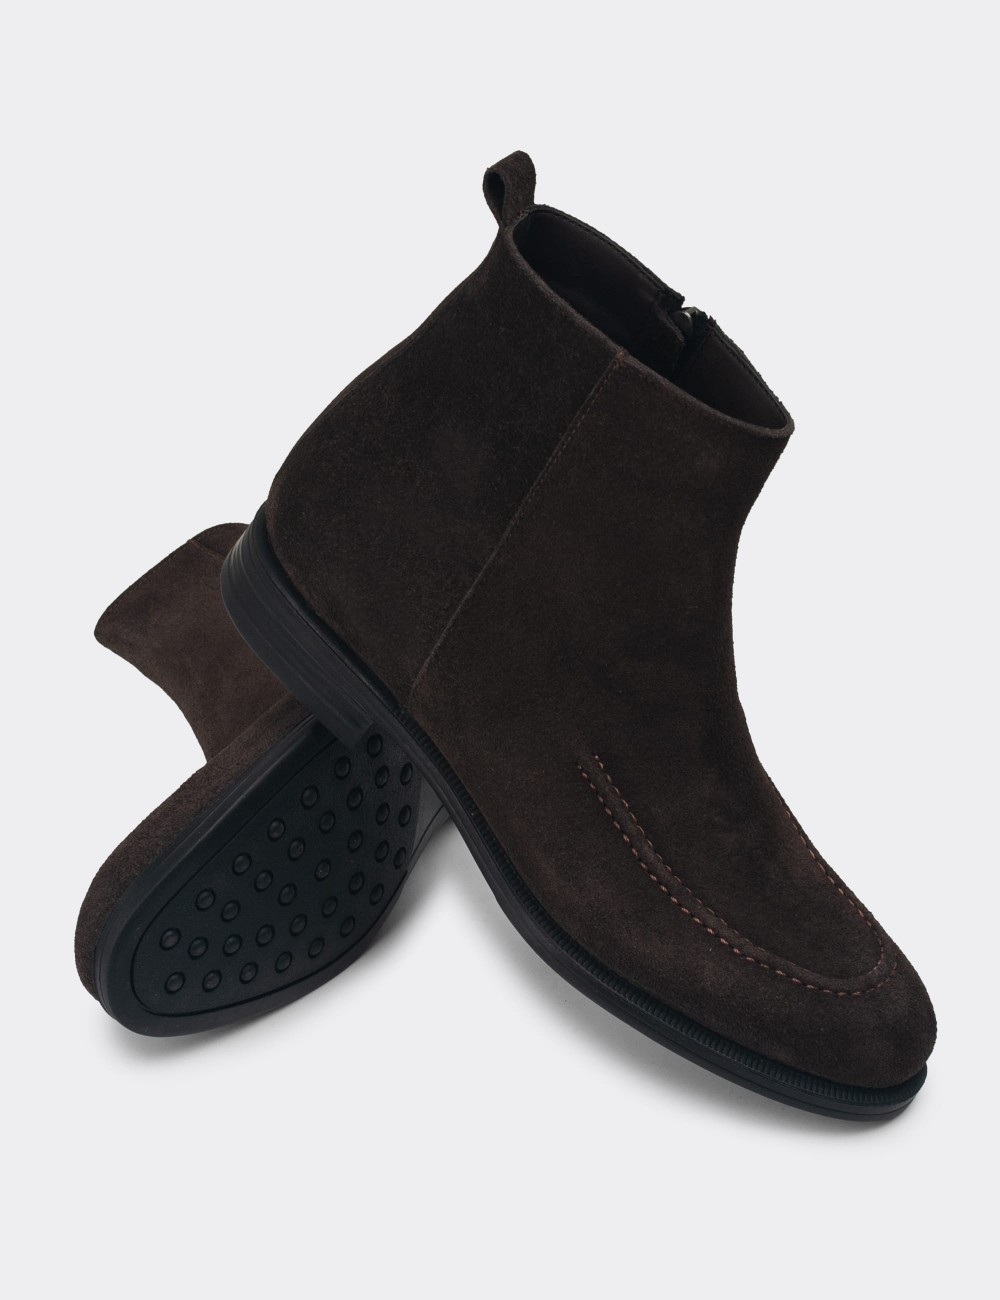 Brown Suede Leather Boots - 01975MKHVC01